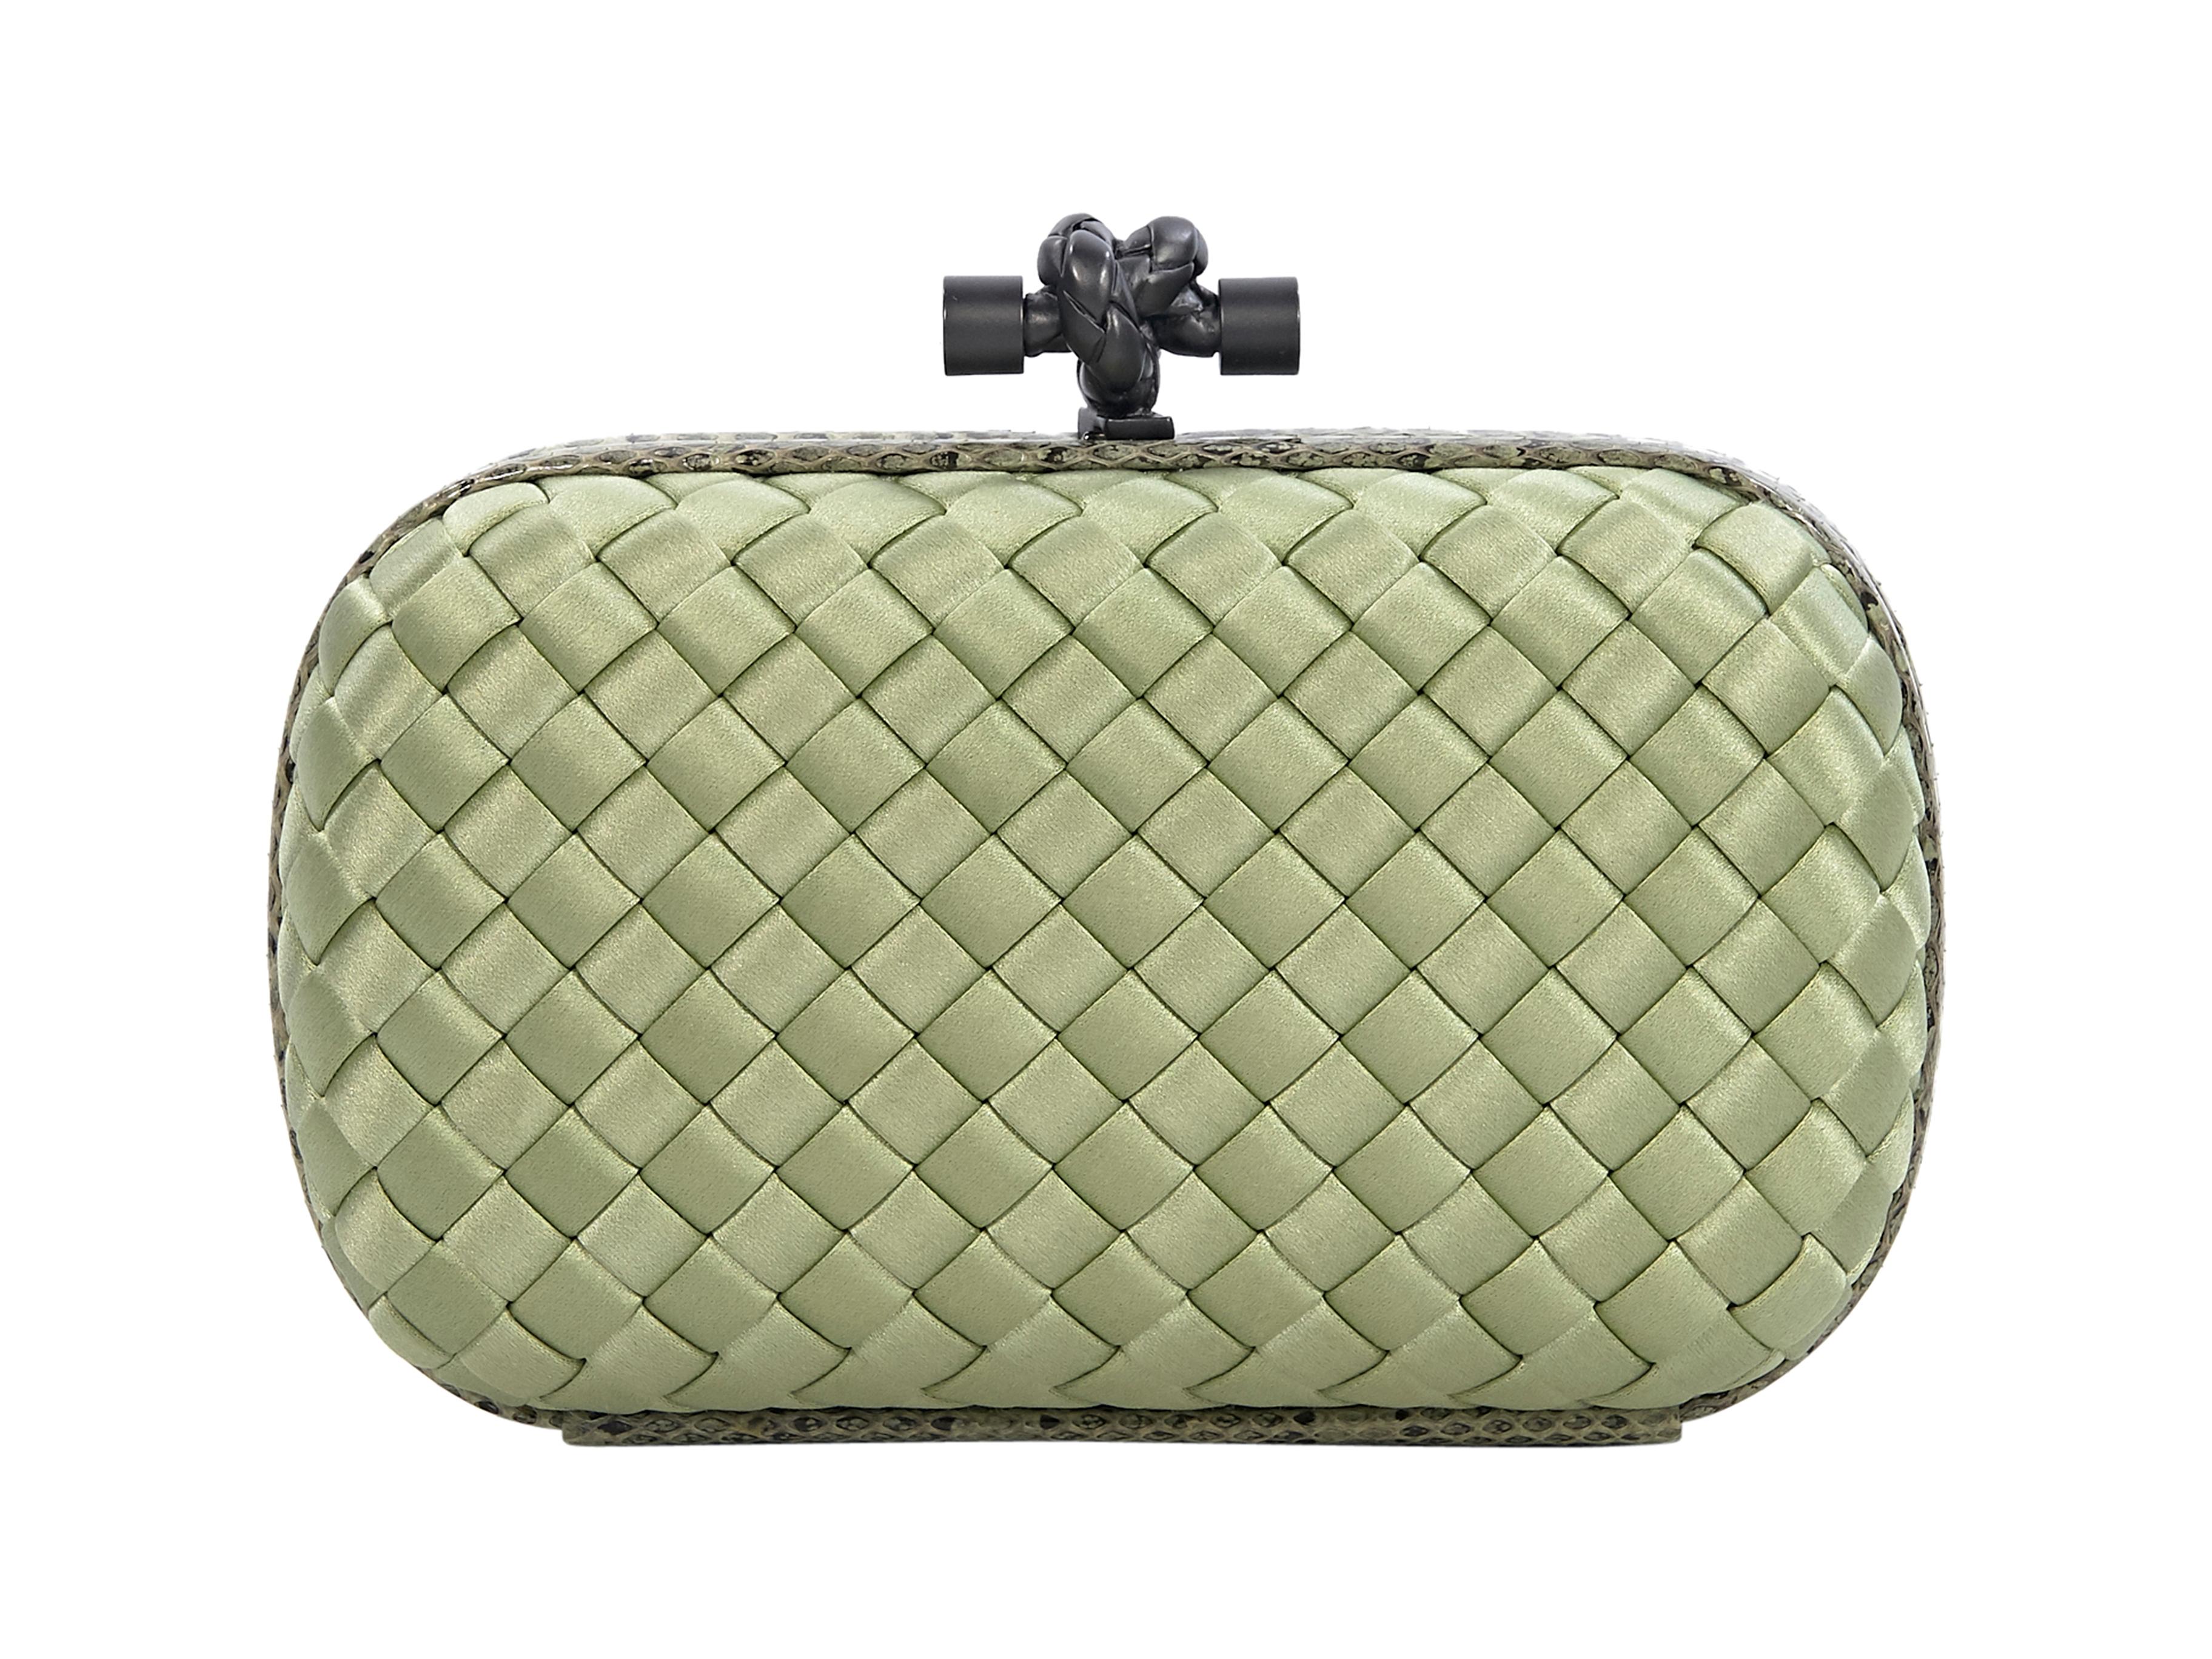 Product details:  Light green intrecciato silk clutch by Bottega Veneta.  Trimmed with snakeskin.  Knot push-lock clasp closure.  Lined interior.  Gunmetal-tone hardware.  Dust bag included.  8